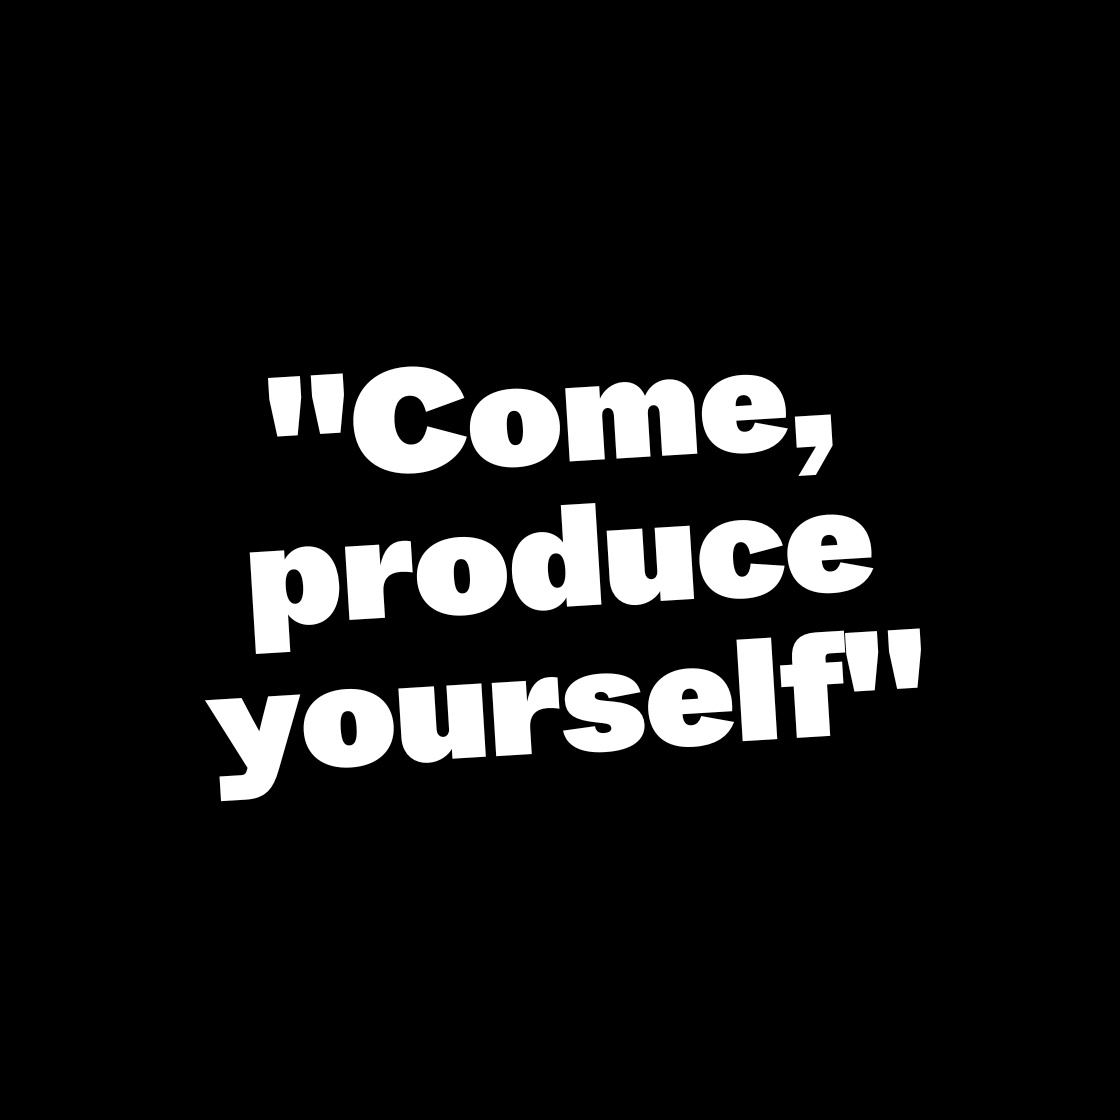 Come, produce yourself